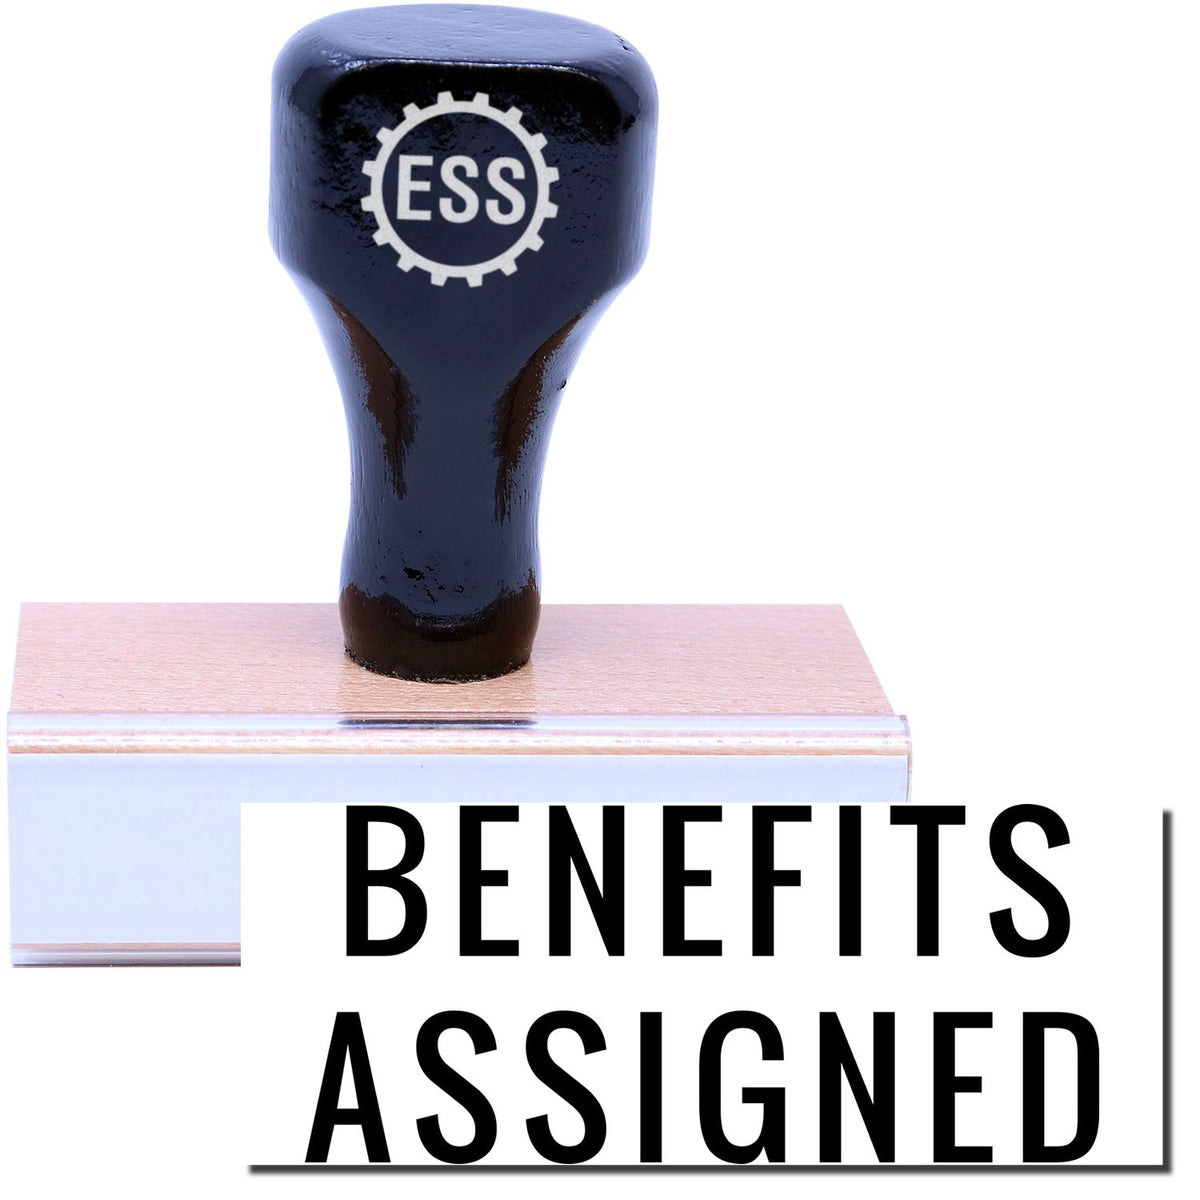 A stock office rubber stamp with a stamped image showing how the text &quot;BENEFITS ASSIGNED&quot; in a narrow font is displayed after stamping.